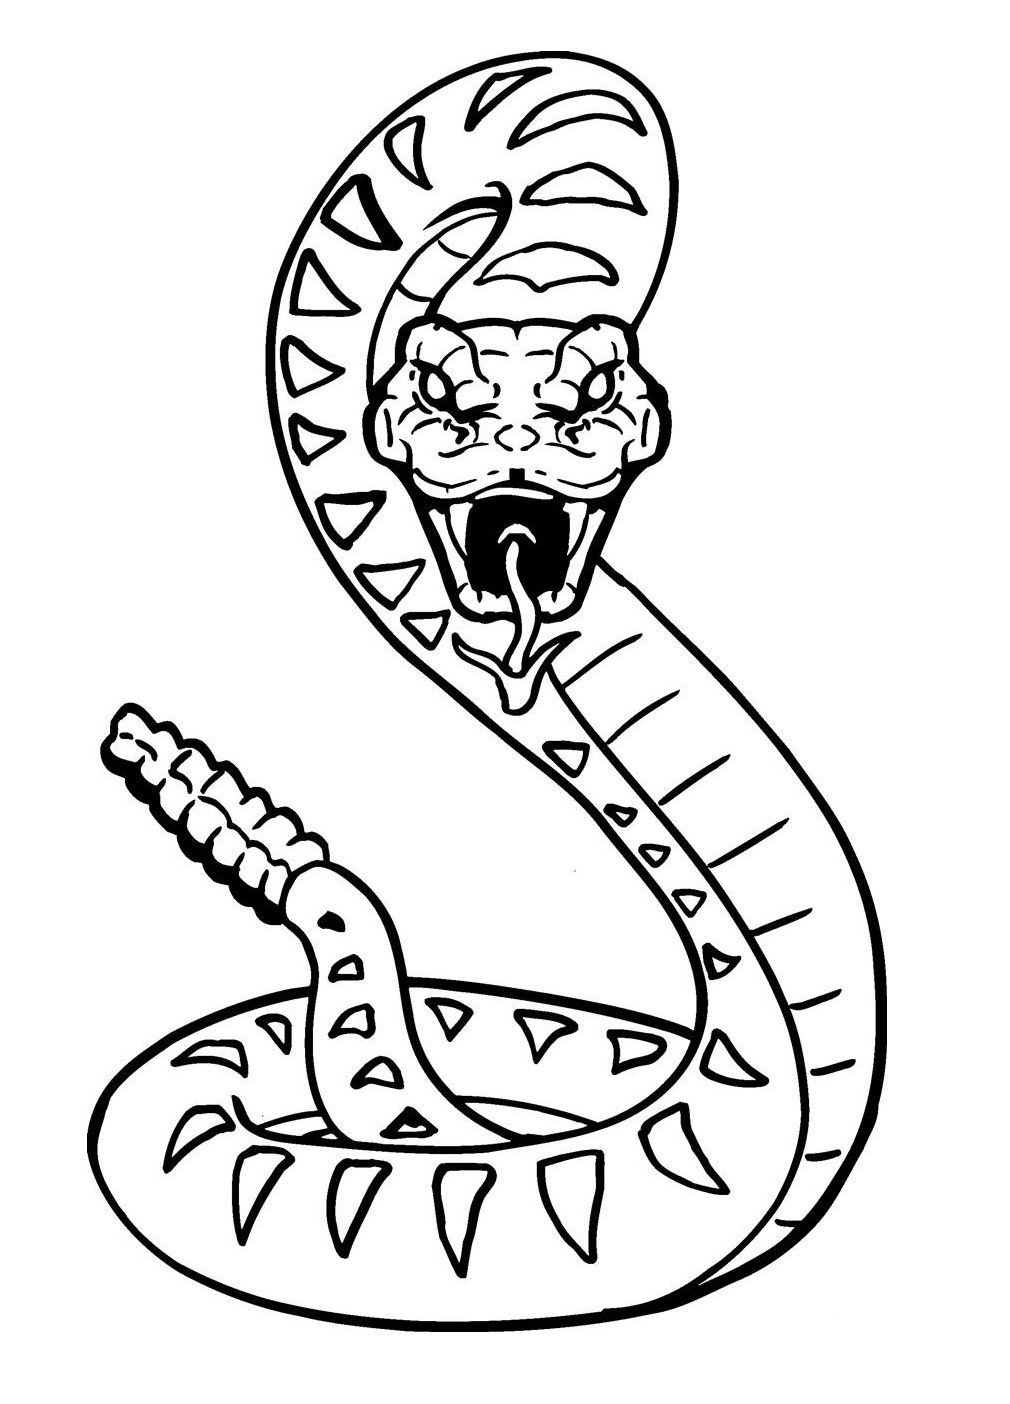 Snake coloring pages zoo coloring pages animal coloring pages